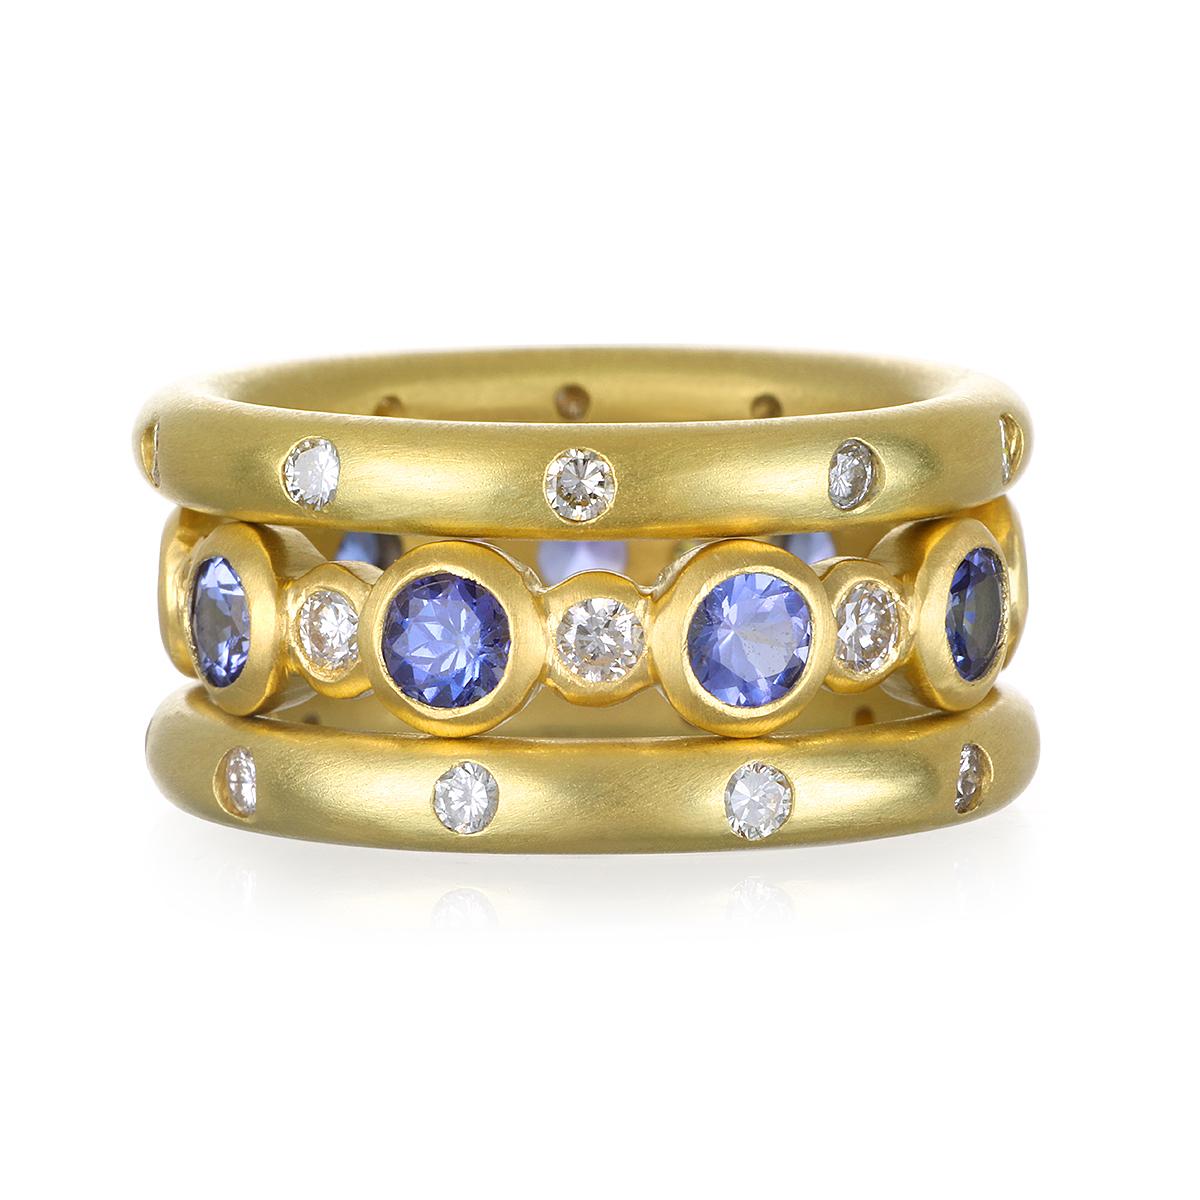 Faye Kim 18K Gold Diamond and Tanzanite Eternity Ring. 
Classic eternity band with bezel set diamonds and Tanzanite in 18k gold. Wear alone or stack with other colors. 

Size 7.25
Diamonds: .38 tcw
Tanzanite: 2.01 tcw
Width 4.8mm

Made in the USA